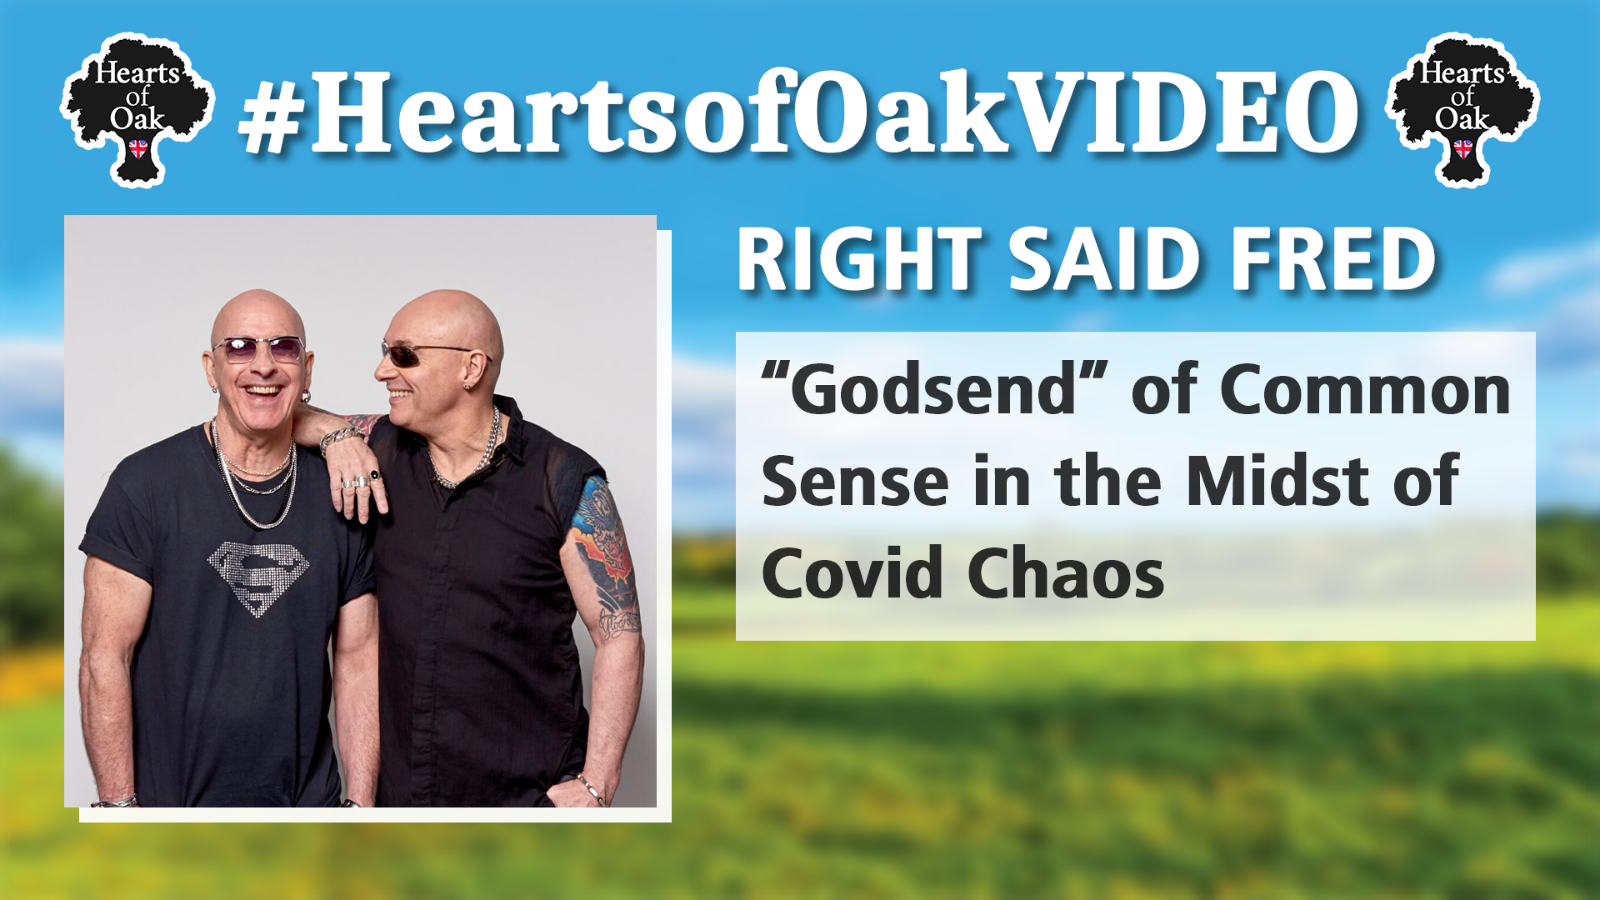 Right Said Fred - 'Godsend' of Common Sense in the Midst of Covid Chaos